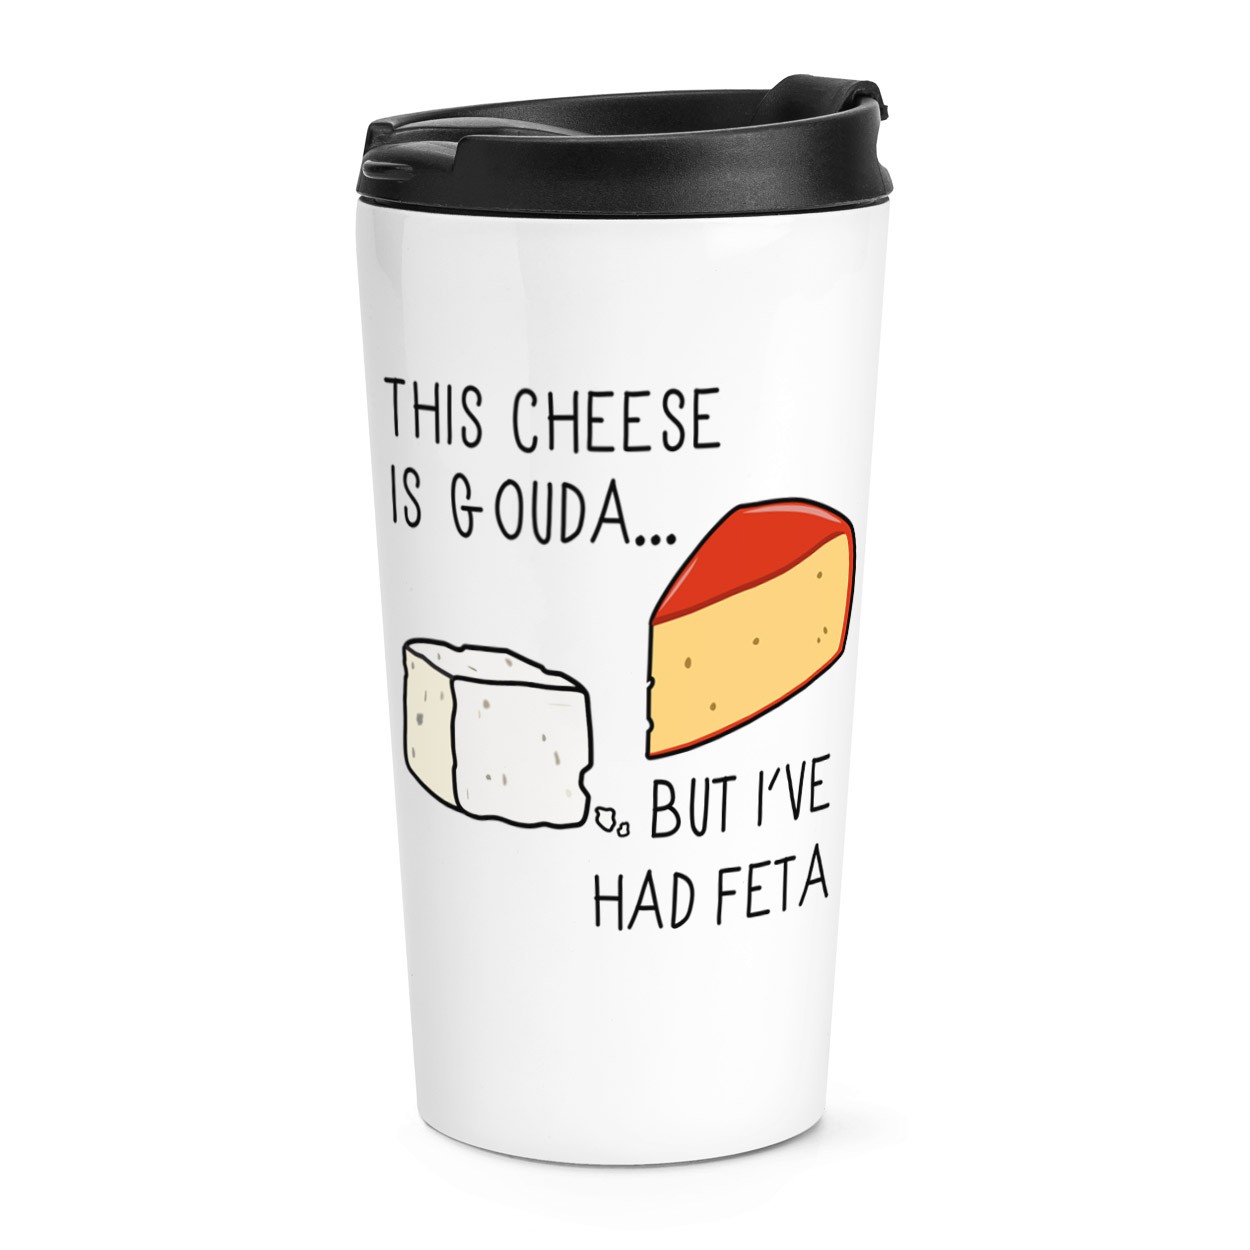 This Cheese Is Gouda But I've Had Feta Travel Mug Cup